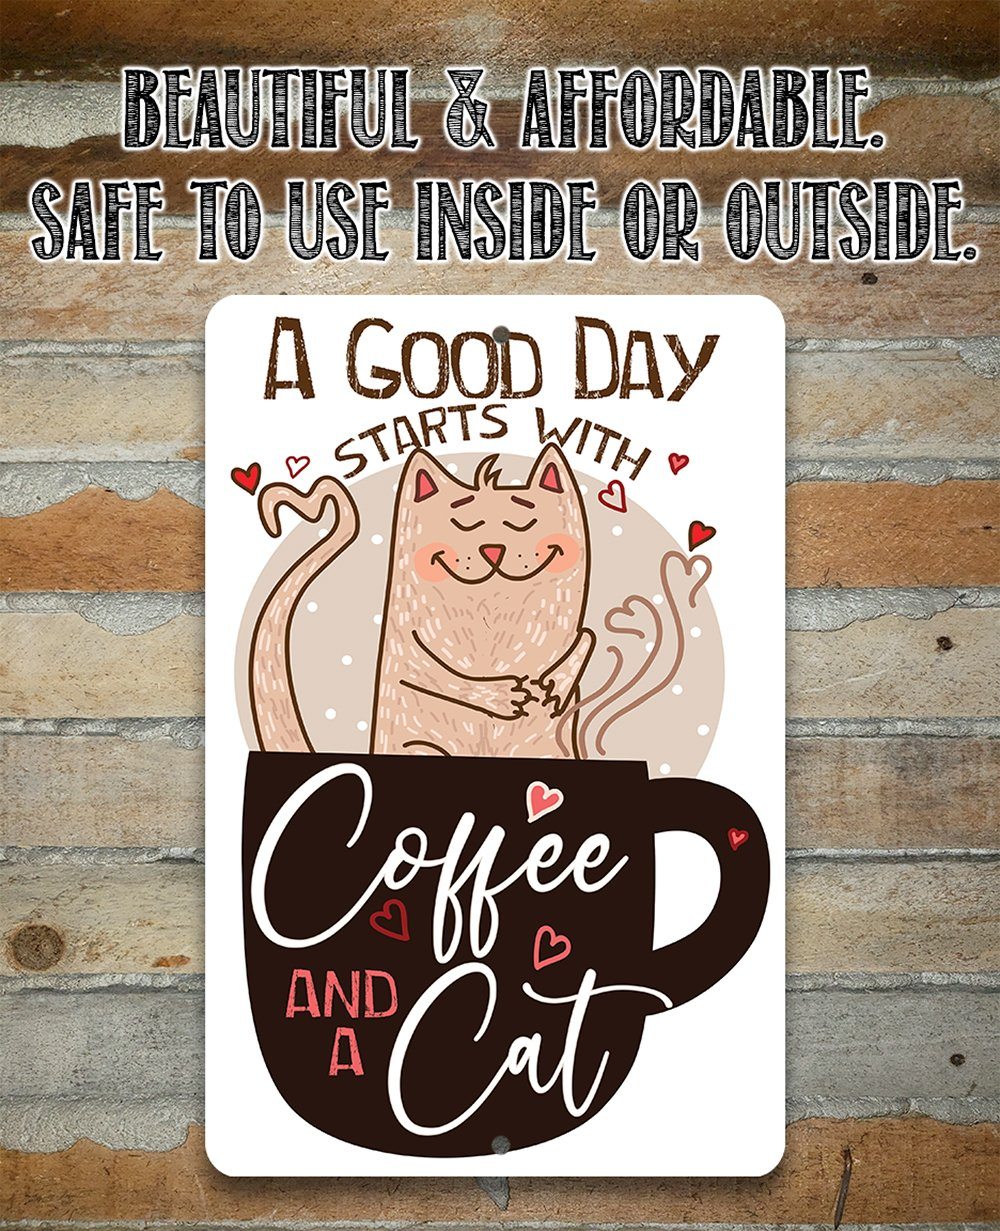 A Good Day Starts With - Metal Sign | Lone Star Art.